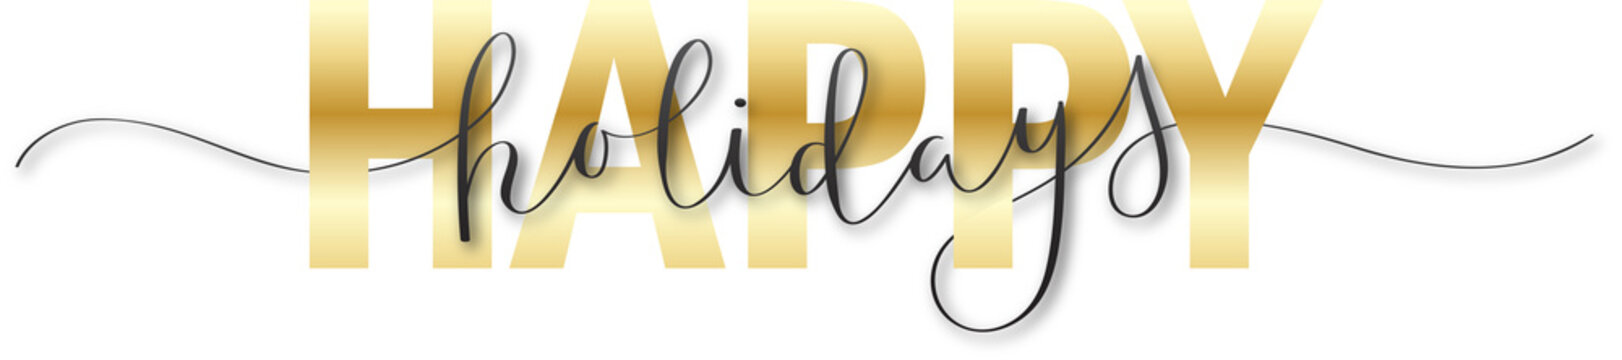 HAPPY HOLIDAYS metallic gold and black brush calligraphy banner on transparent background